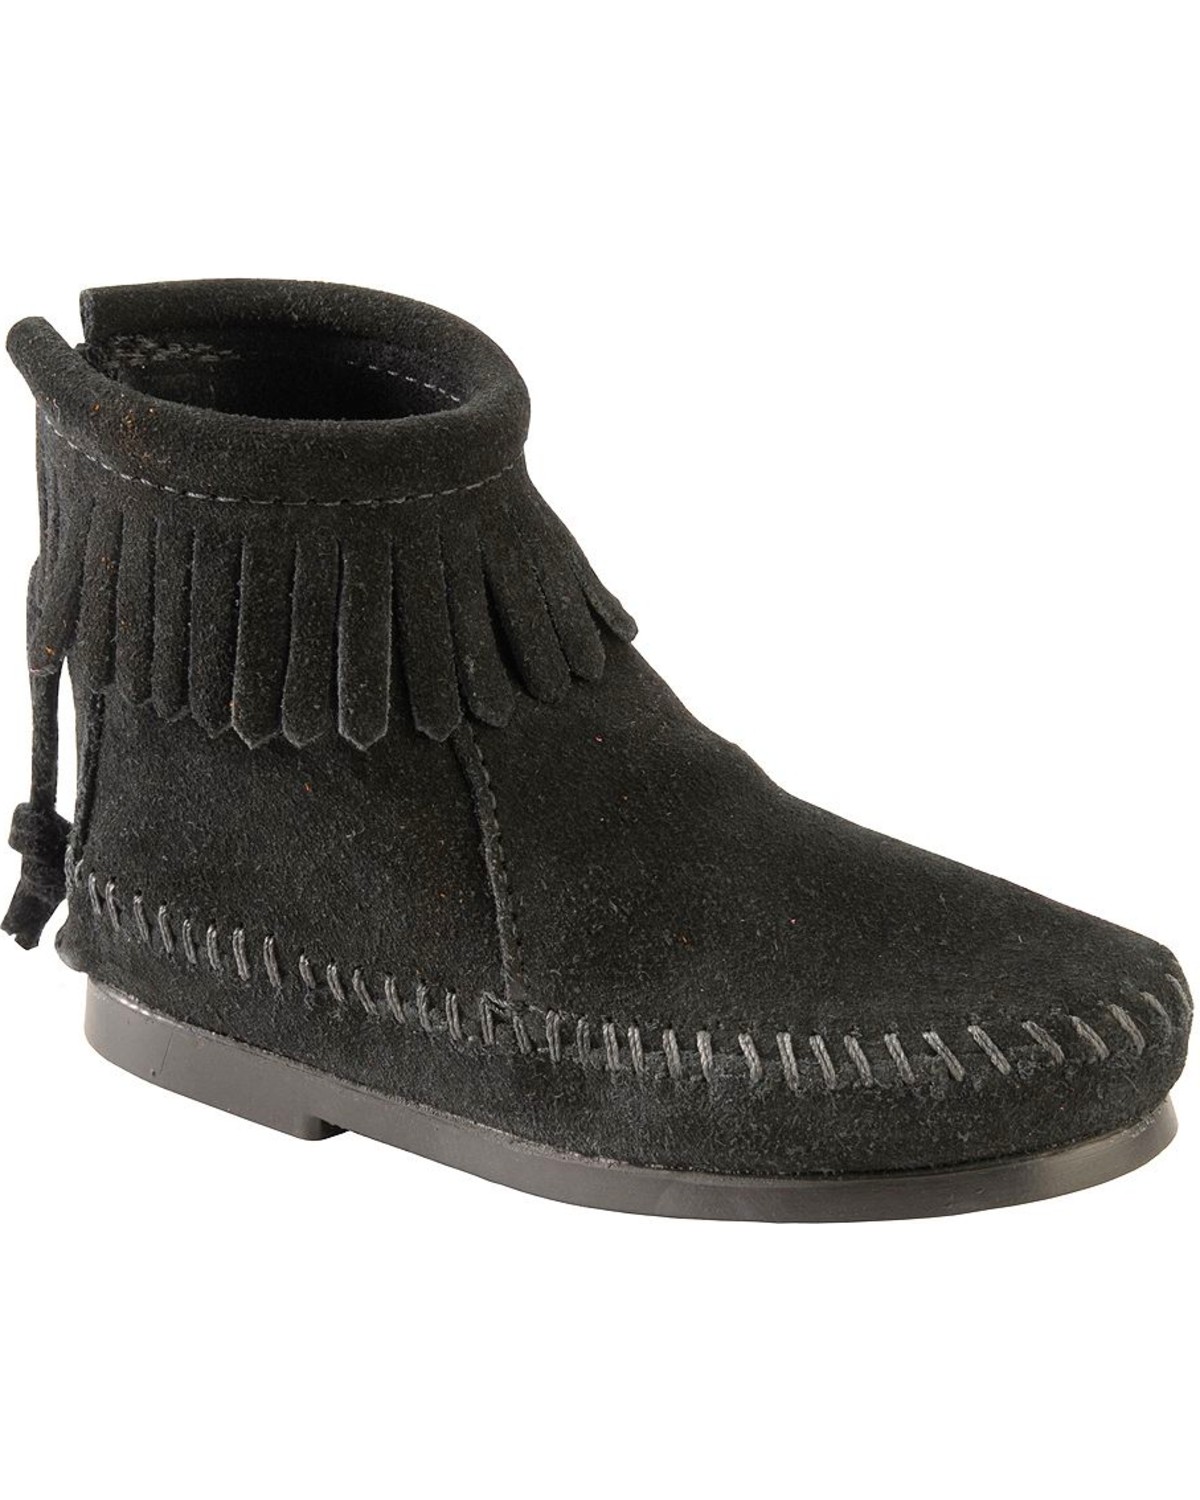 black moccasin boots